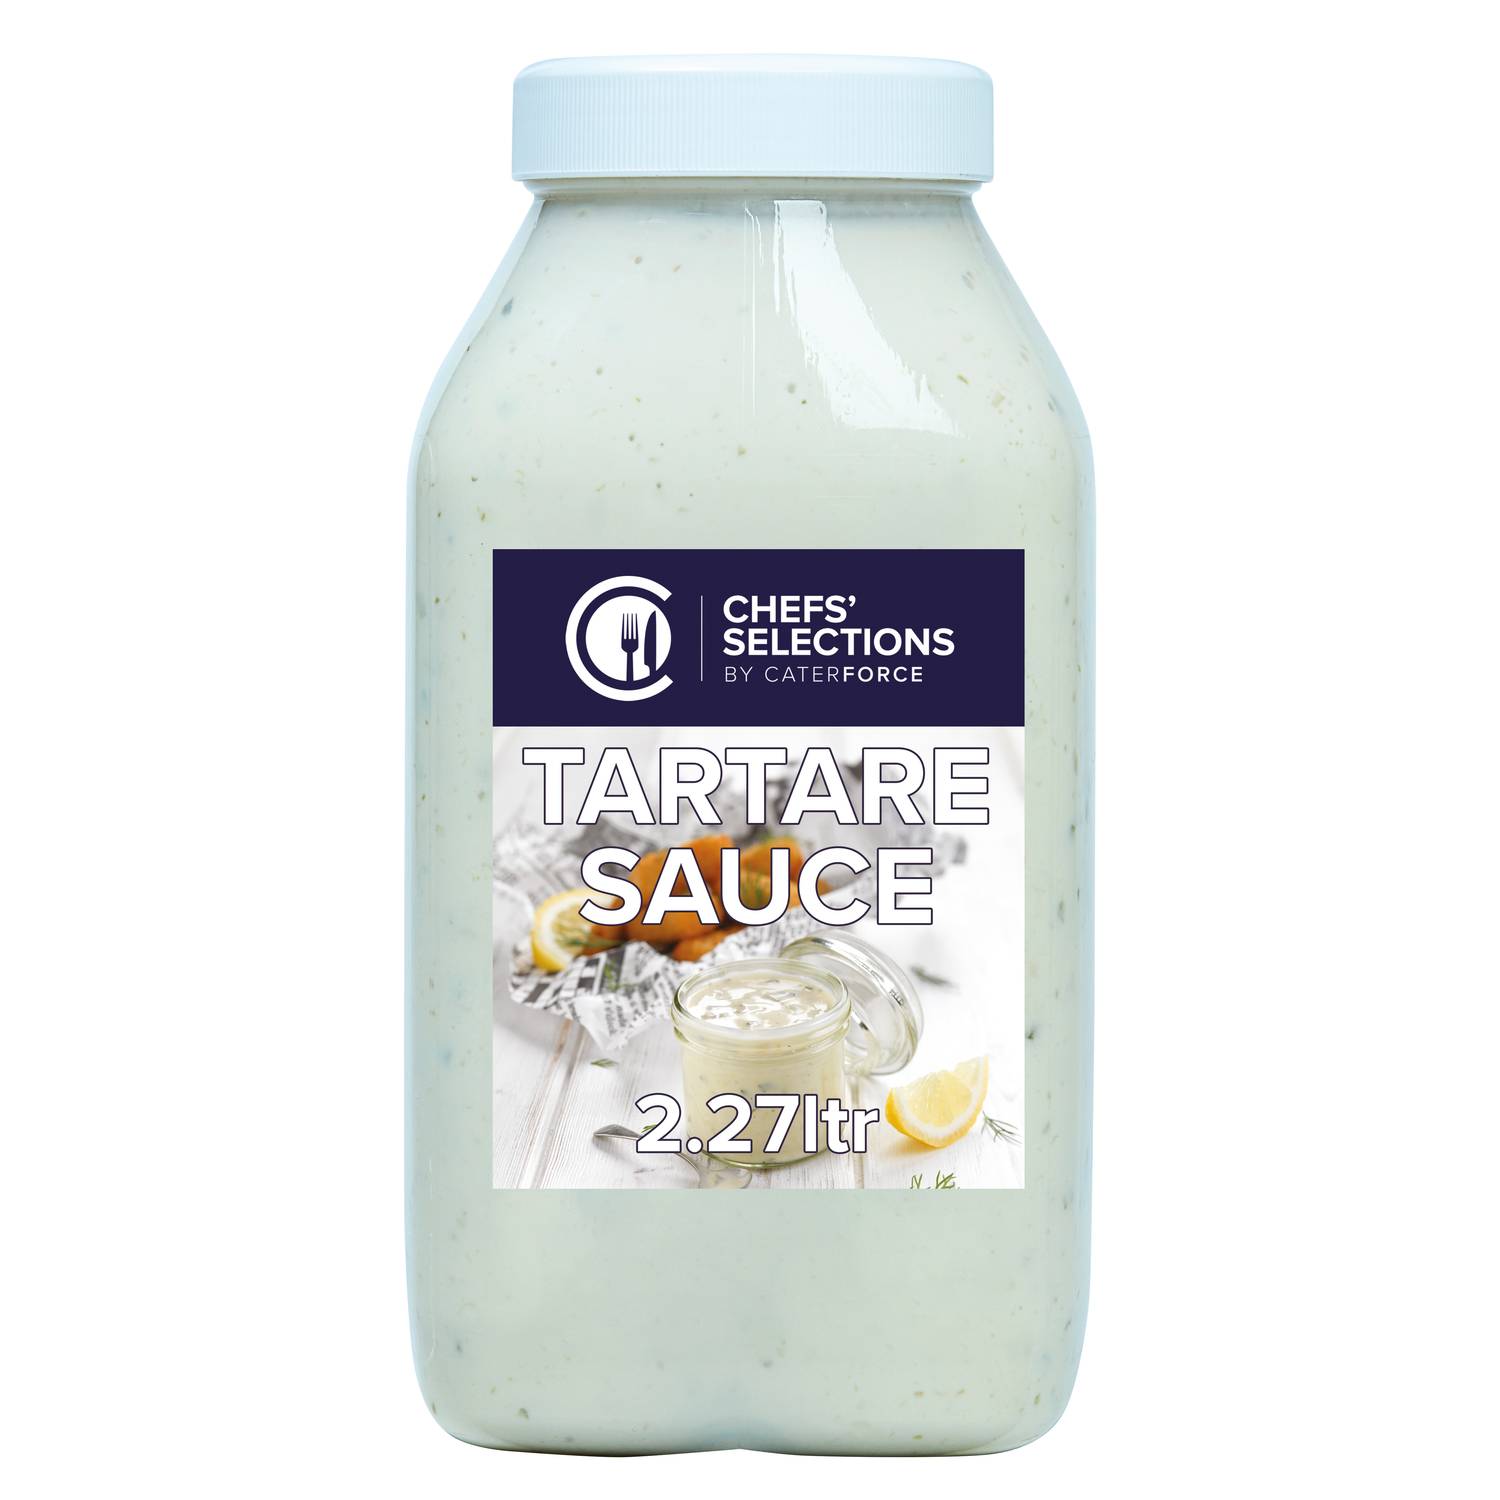 Chefs’ Selections Tartare Sauce (2 x 2.27L)